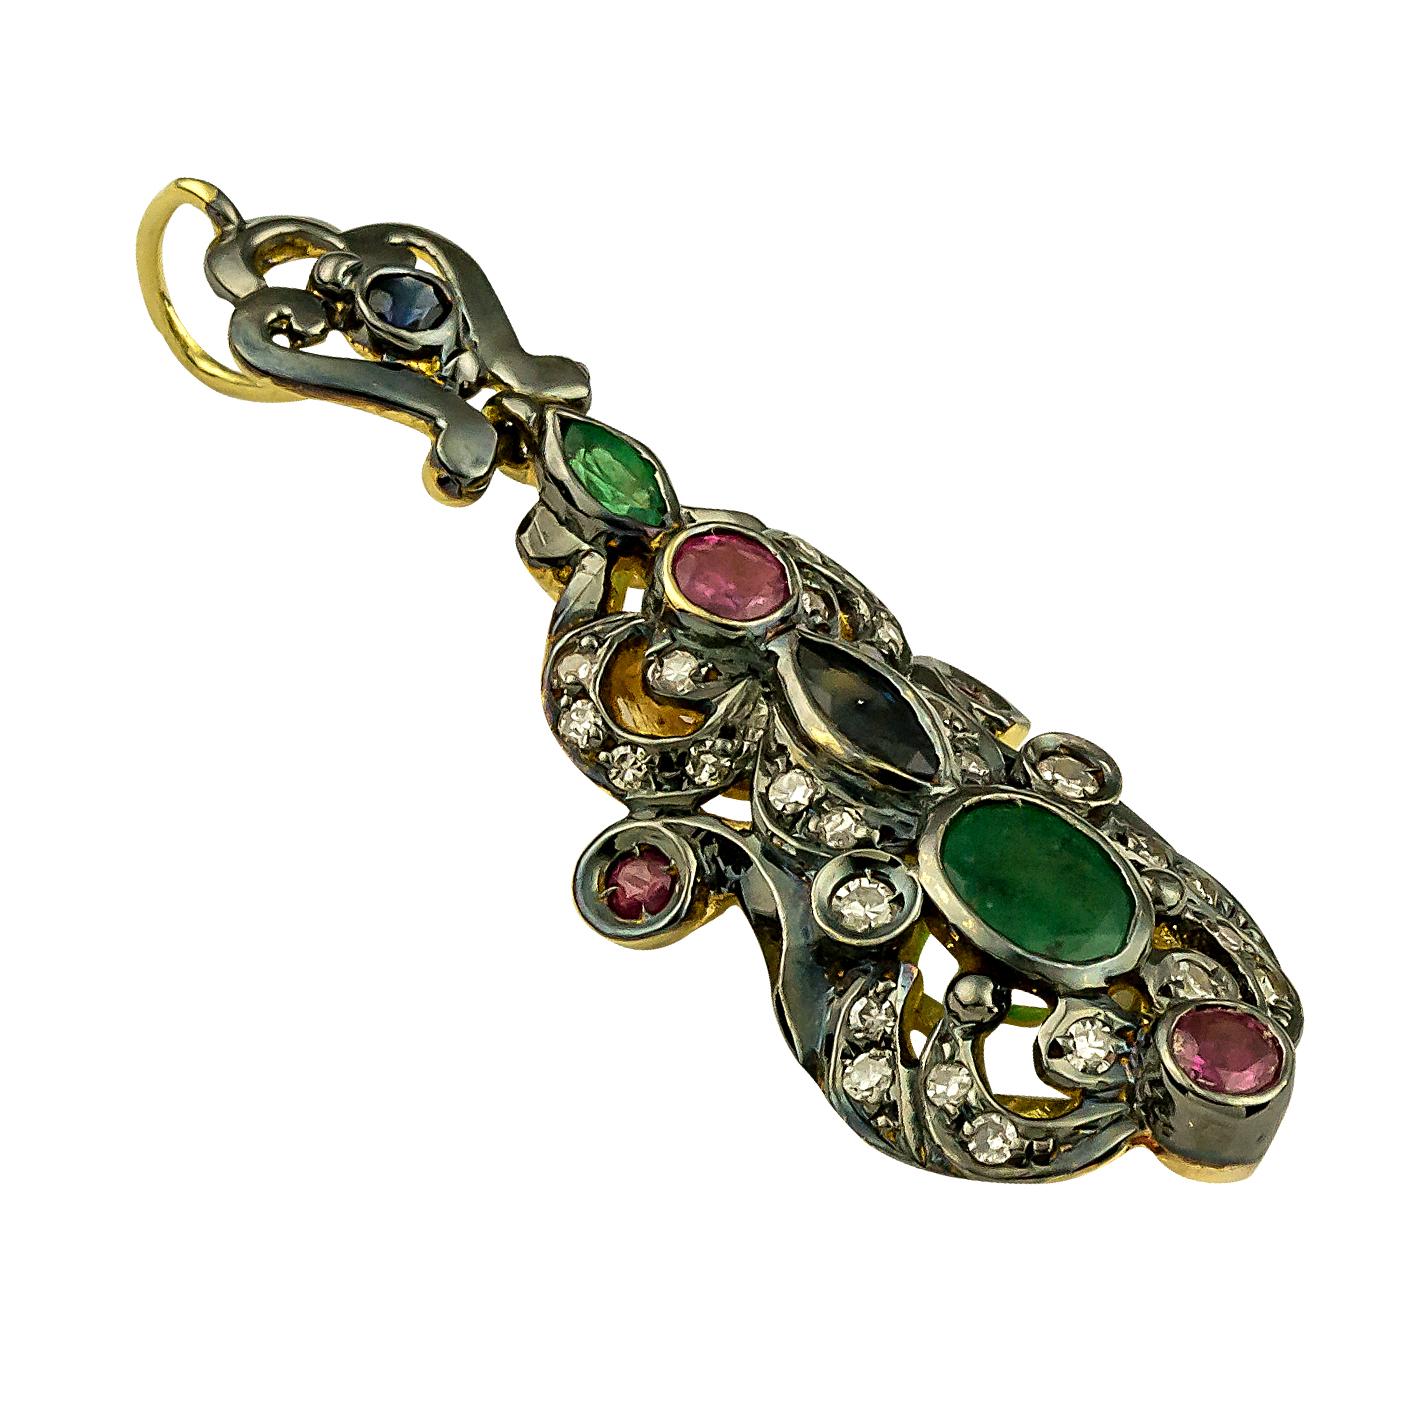 S.Georgios design Byzantine Pendant all handmade from solid 18 Karat Yellow Gold. The unique pendant is finished with Black Rhodium and is decorated with diamonds total weight of 0,30 Carats and Emeralds, Rubies, and Sapphire's total weight of 1,80